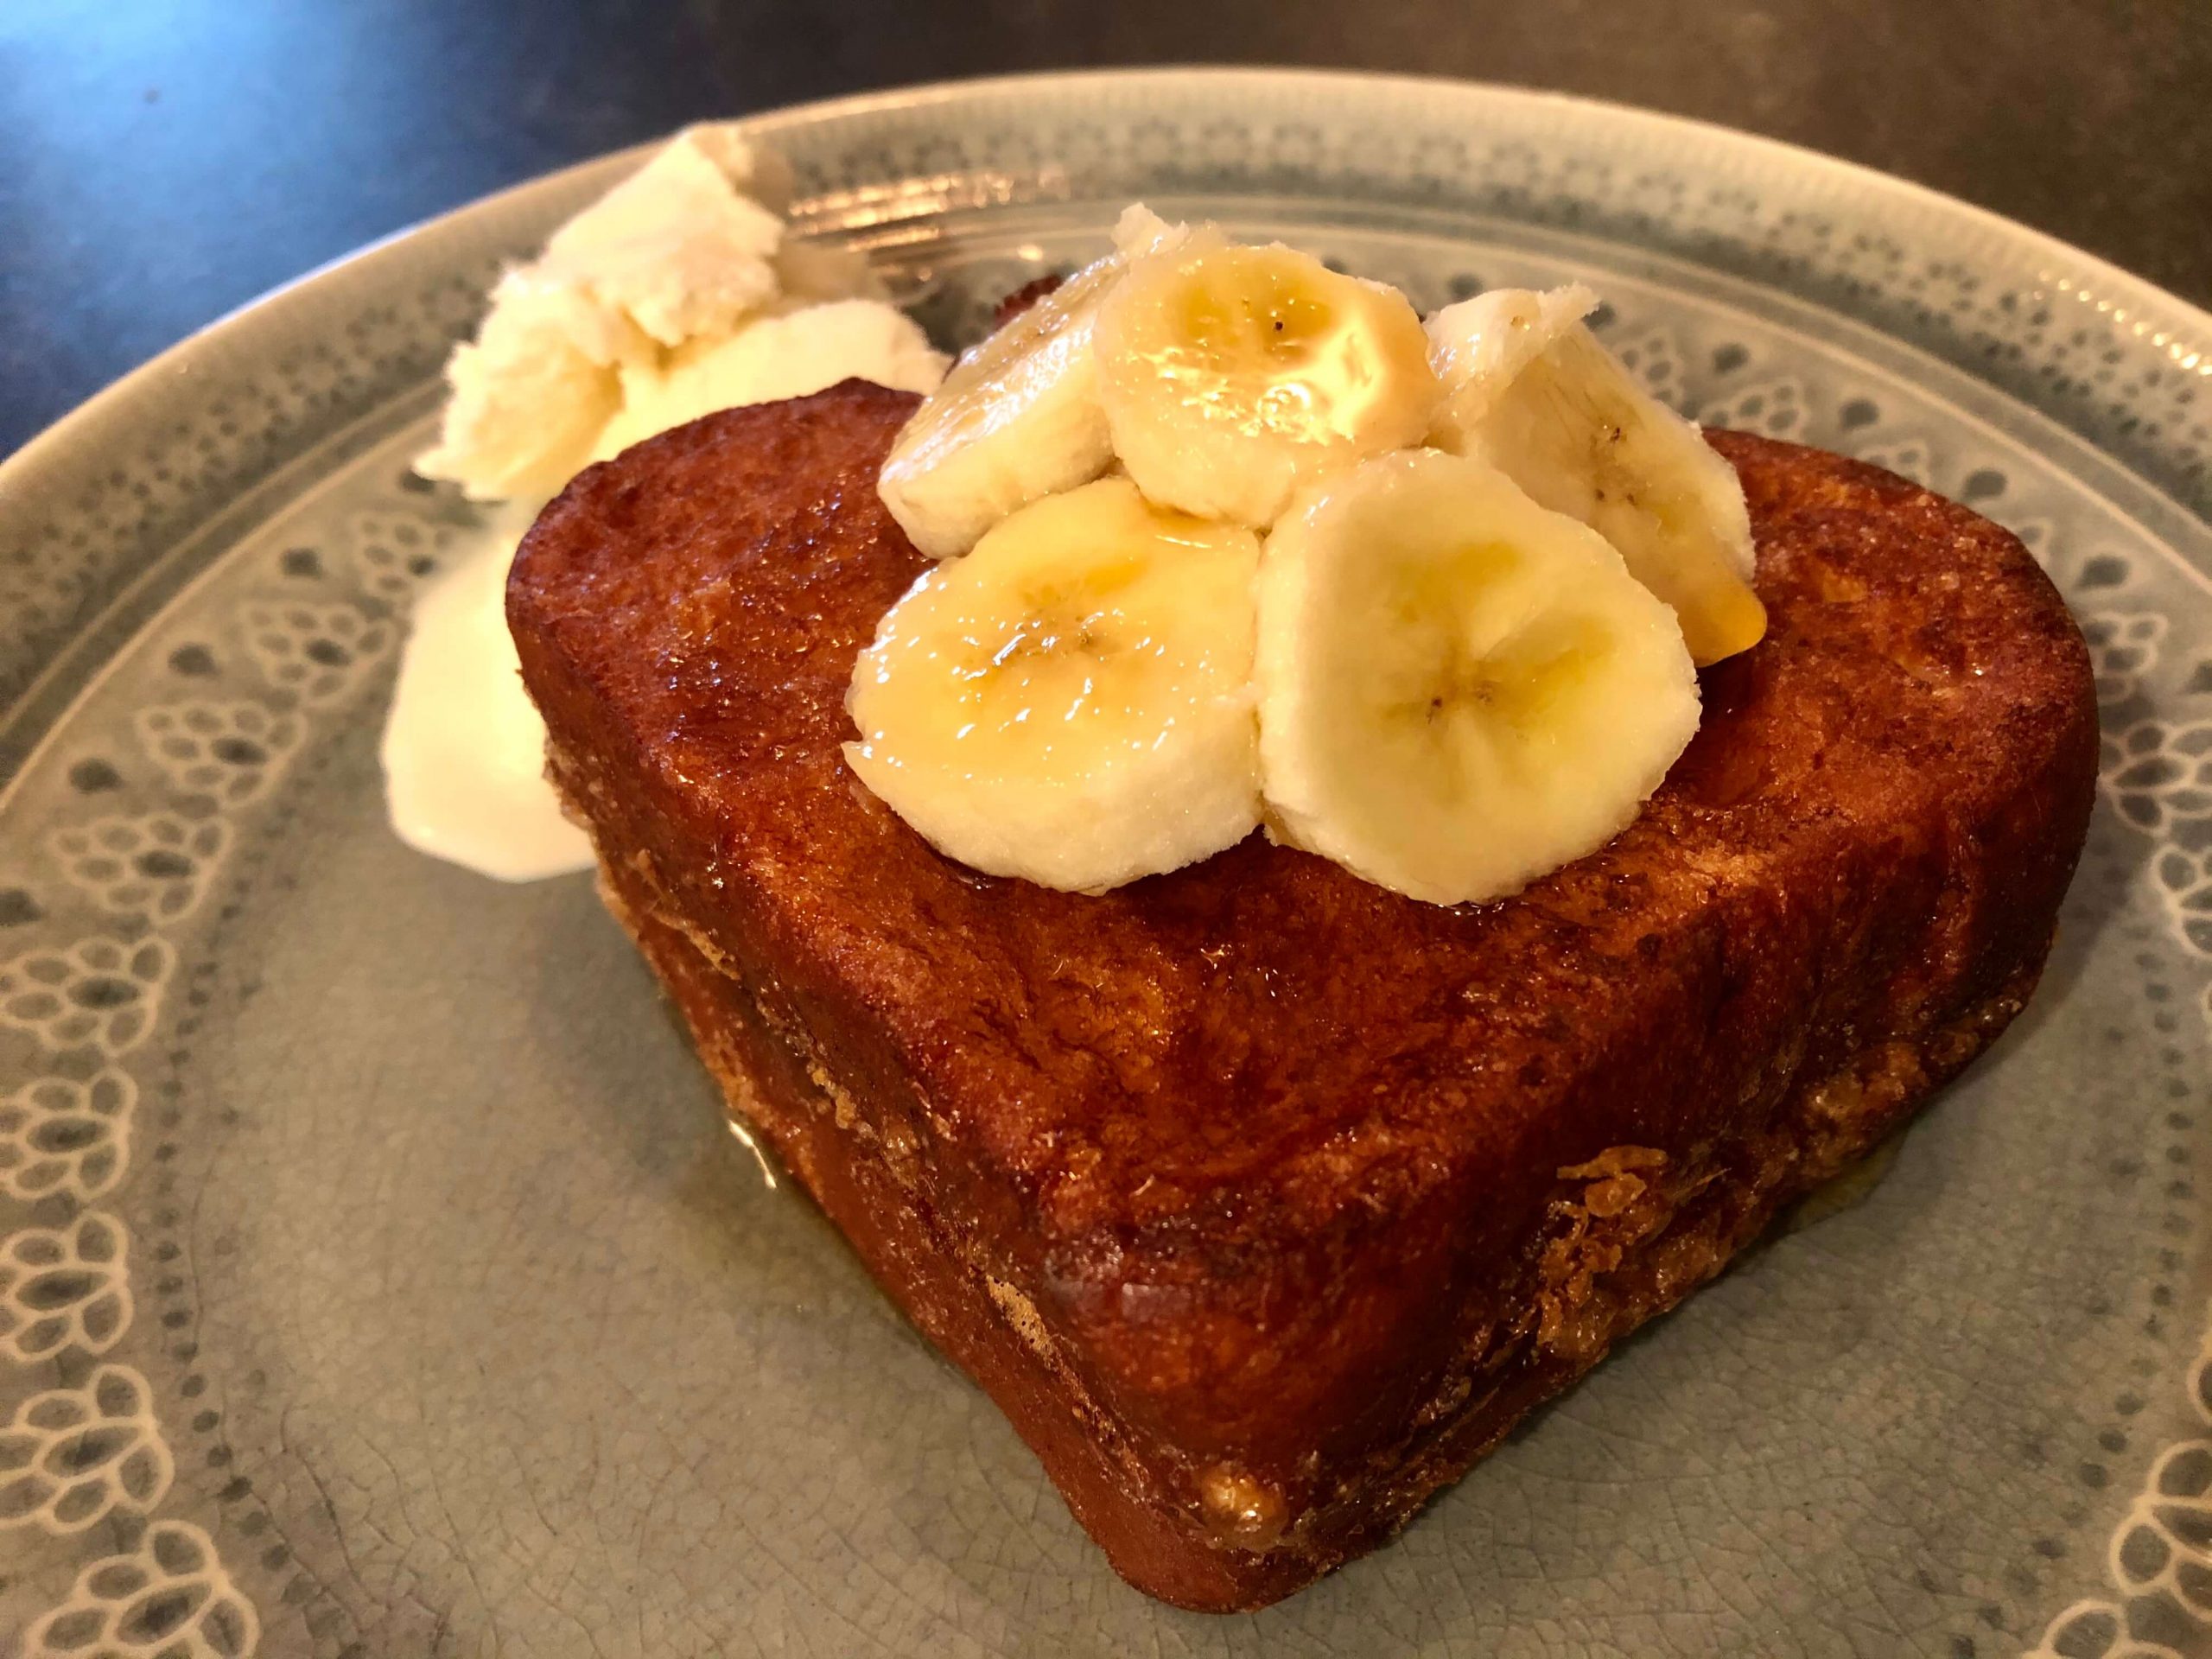 Hong Kong Style French Toast Stuffed with Banana & Peanut Butter